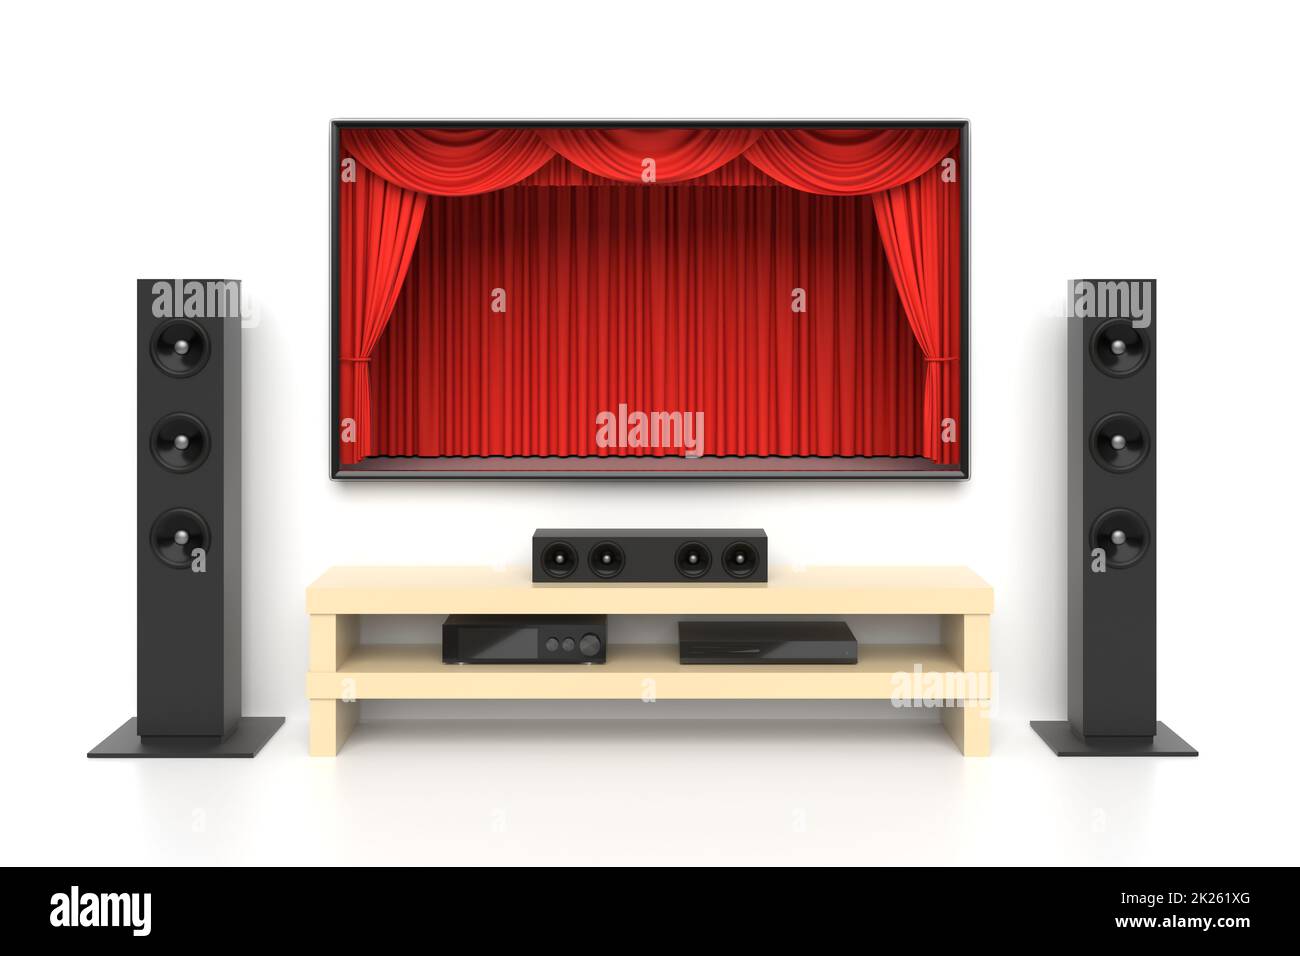 Home cinema set with red curtains 3D illustration Stock Photo